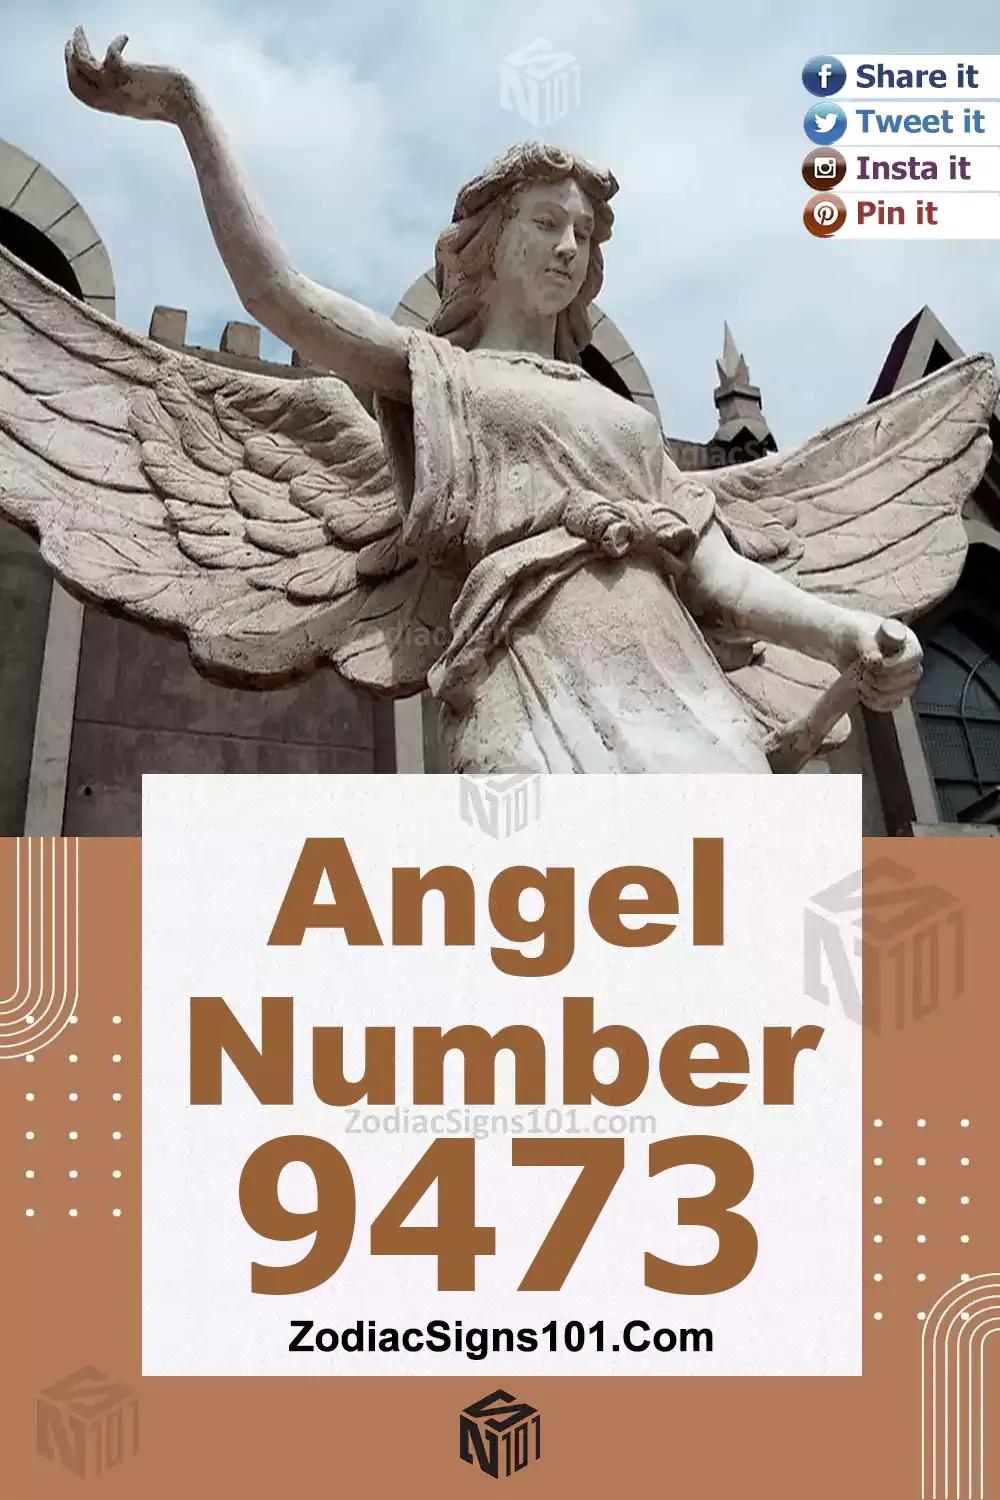 9473 Angel Number Meaning